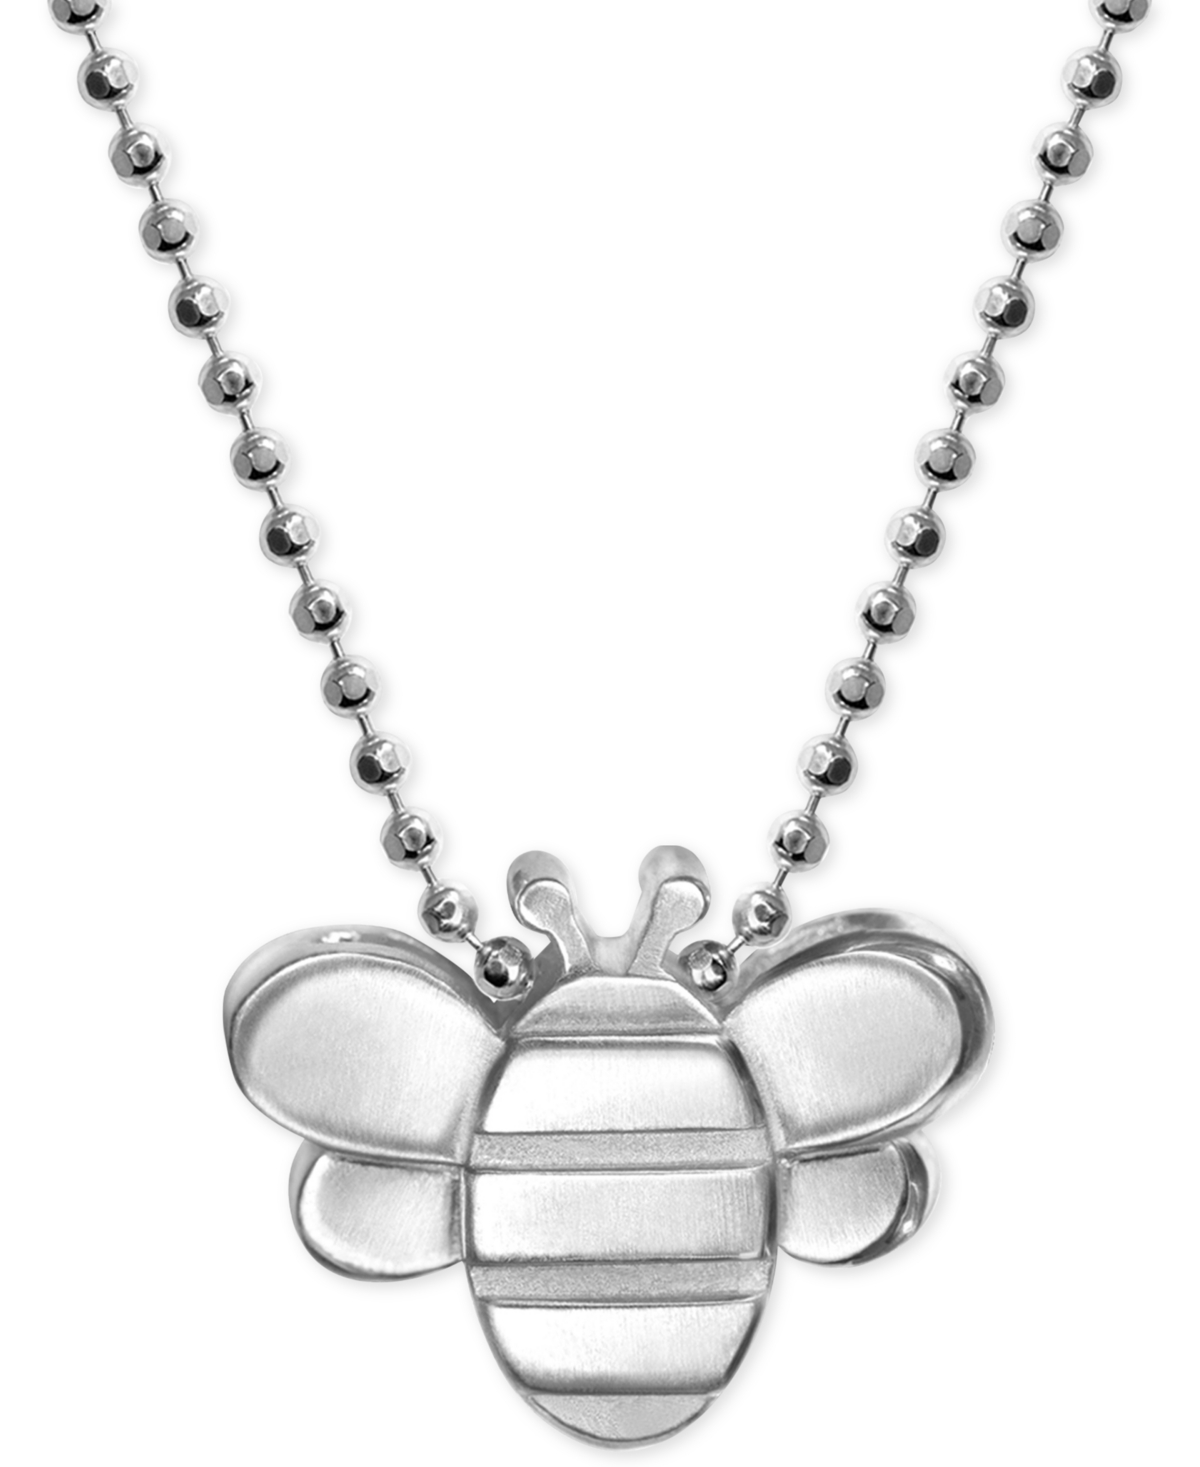 Bumble Bee Pendant Necklace in Sterling Silver - Silver